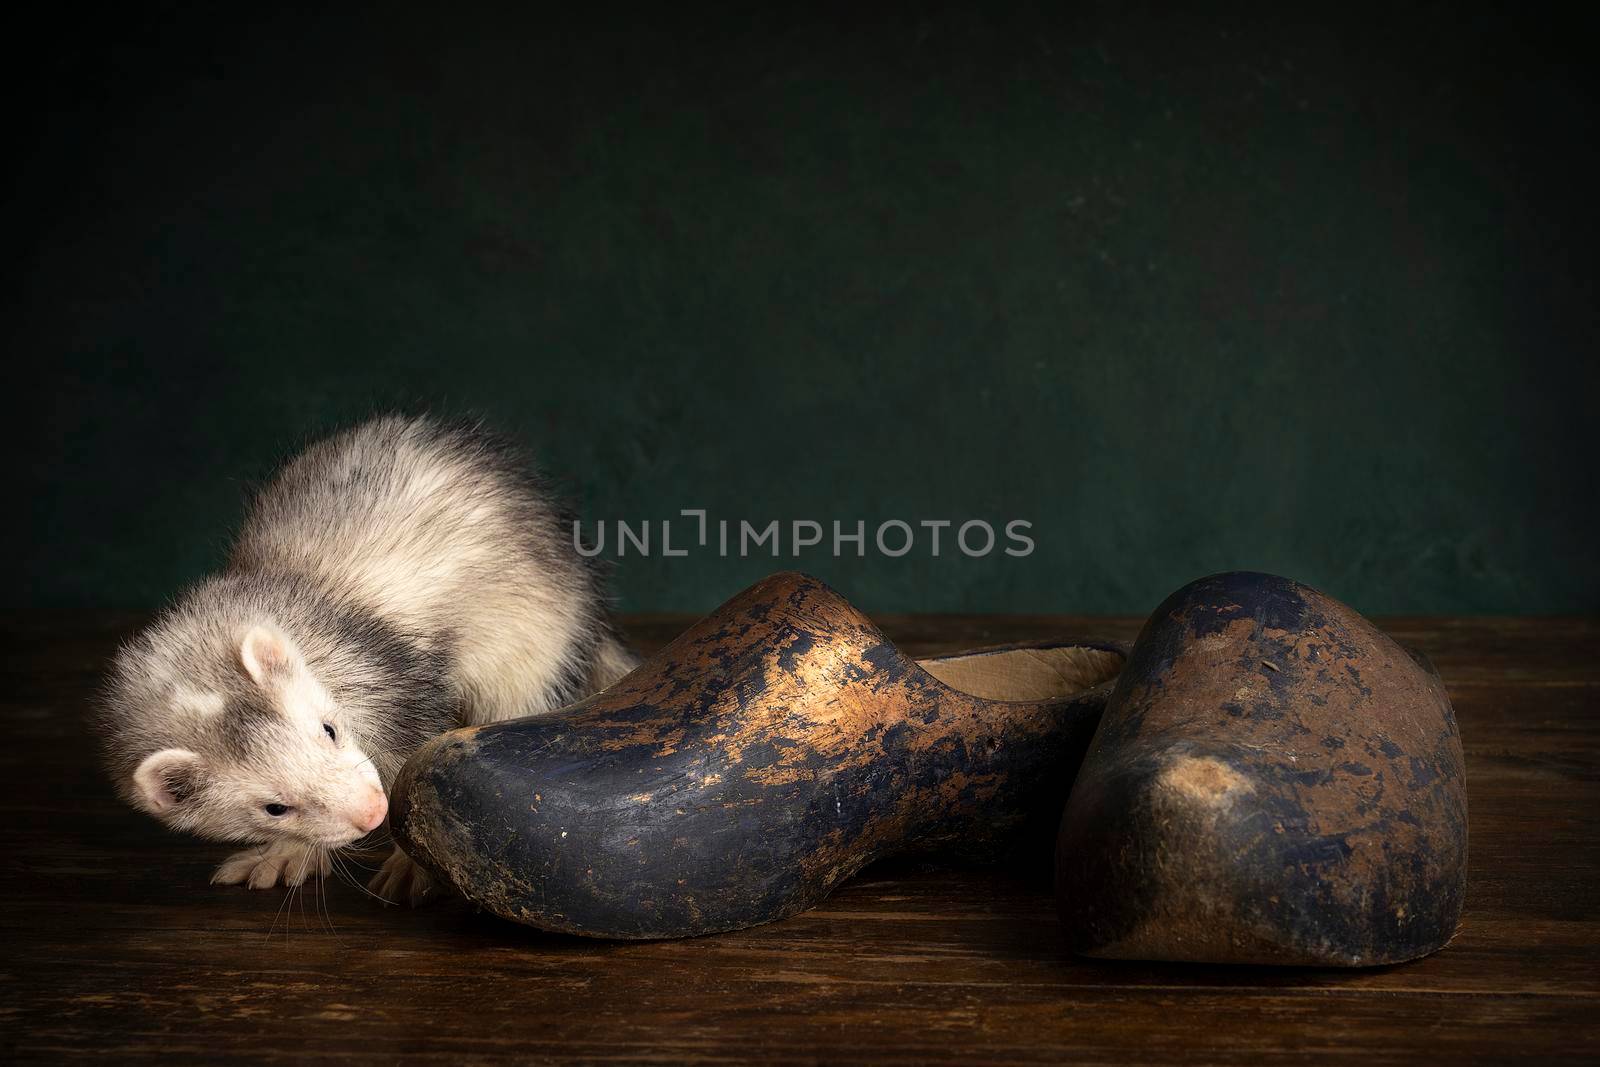 A young ferret or polecat puppy in a stillife scene with clogs or wooden shoes which are typical for The Netherlands against a green background by LeoniekvanderVliet